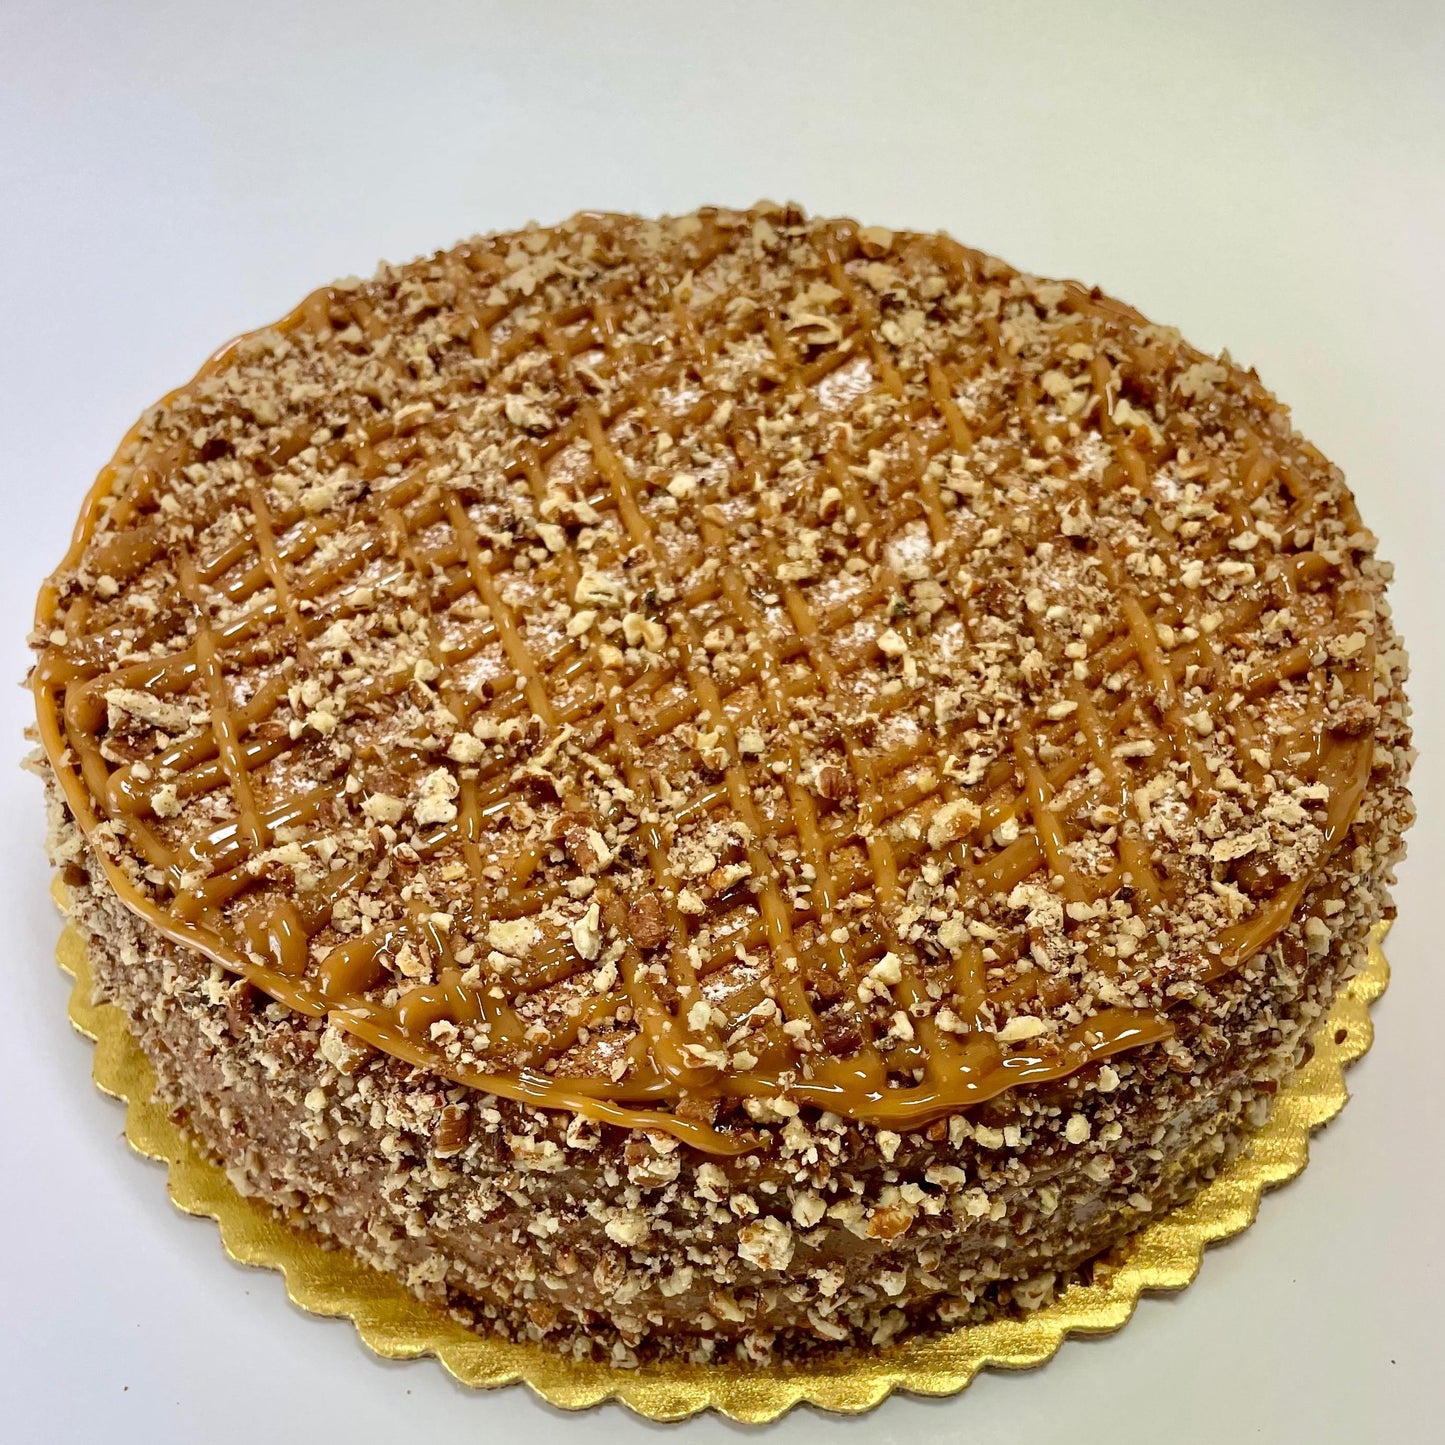 
                  
                    Gluten-free, sugar-free, dairy-free Banana Walnut Full Life Cake with caramel drizzle and crunchy walnuts, emphasizing its moist texture and rich banana flavor. Full Life Gourmet Bakery
                  
                